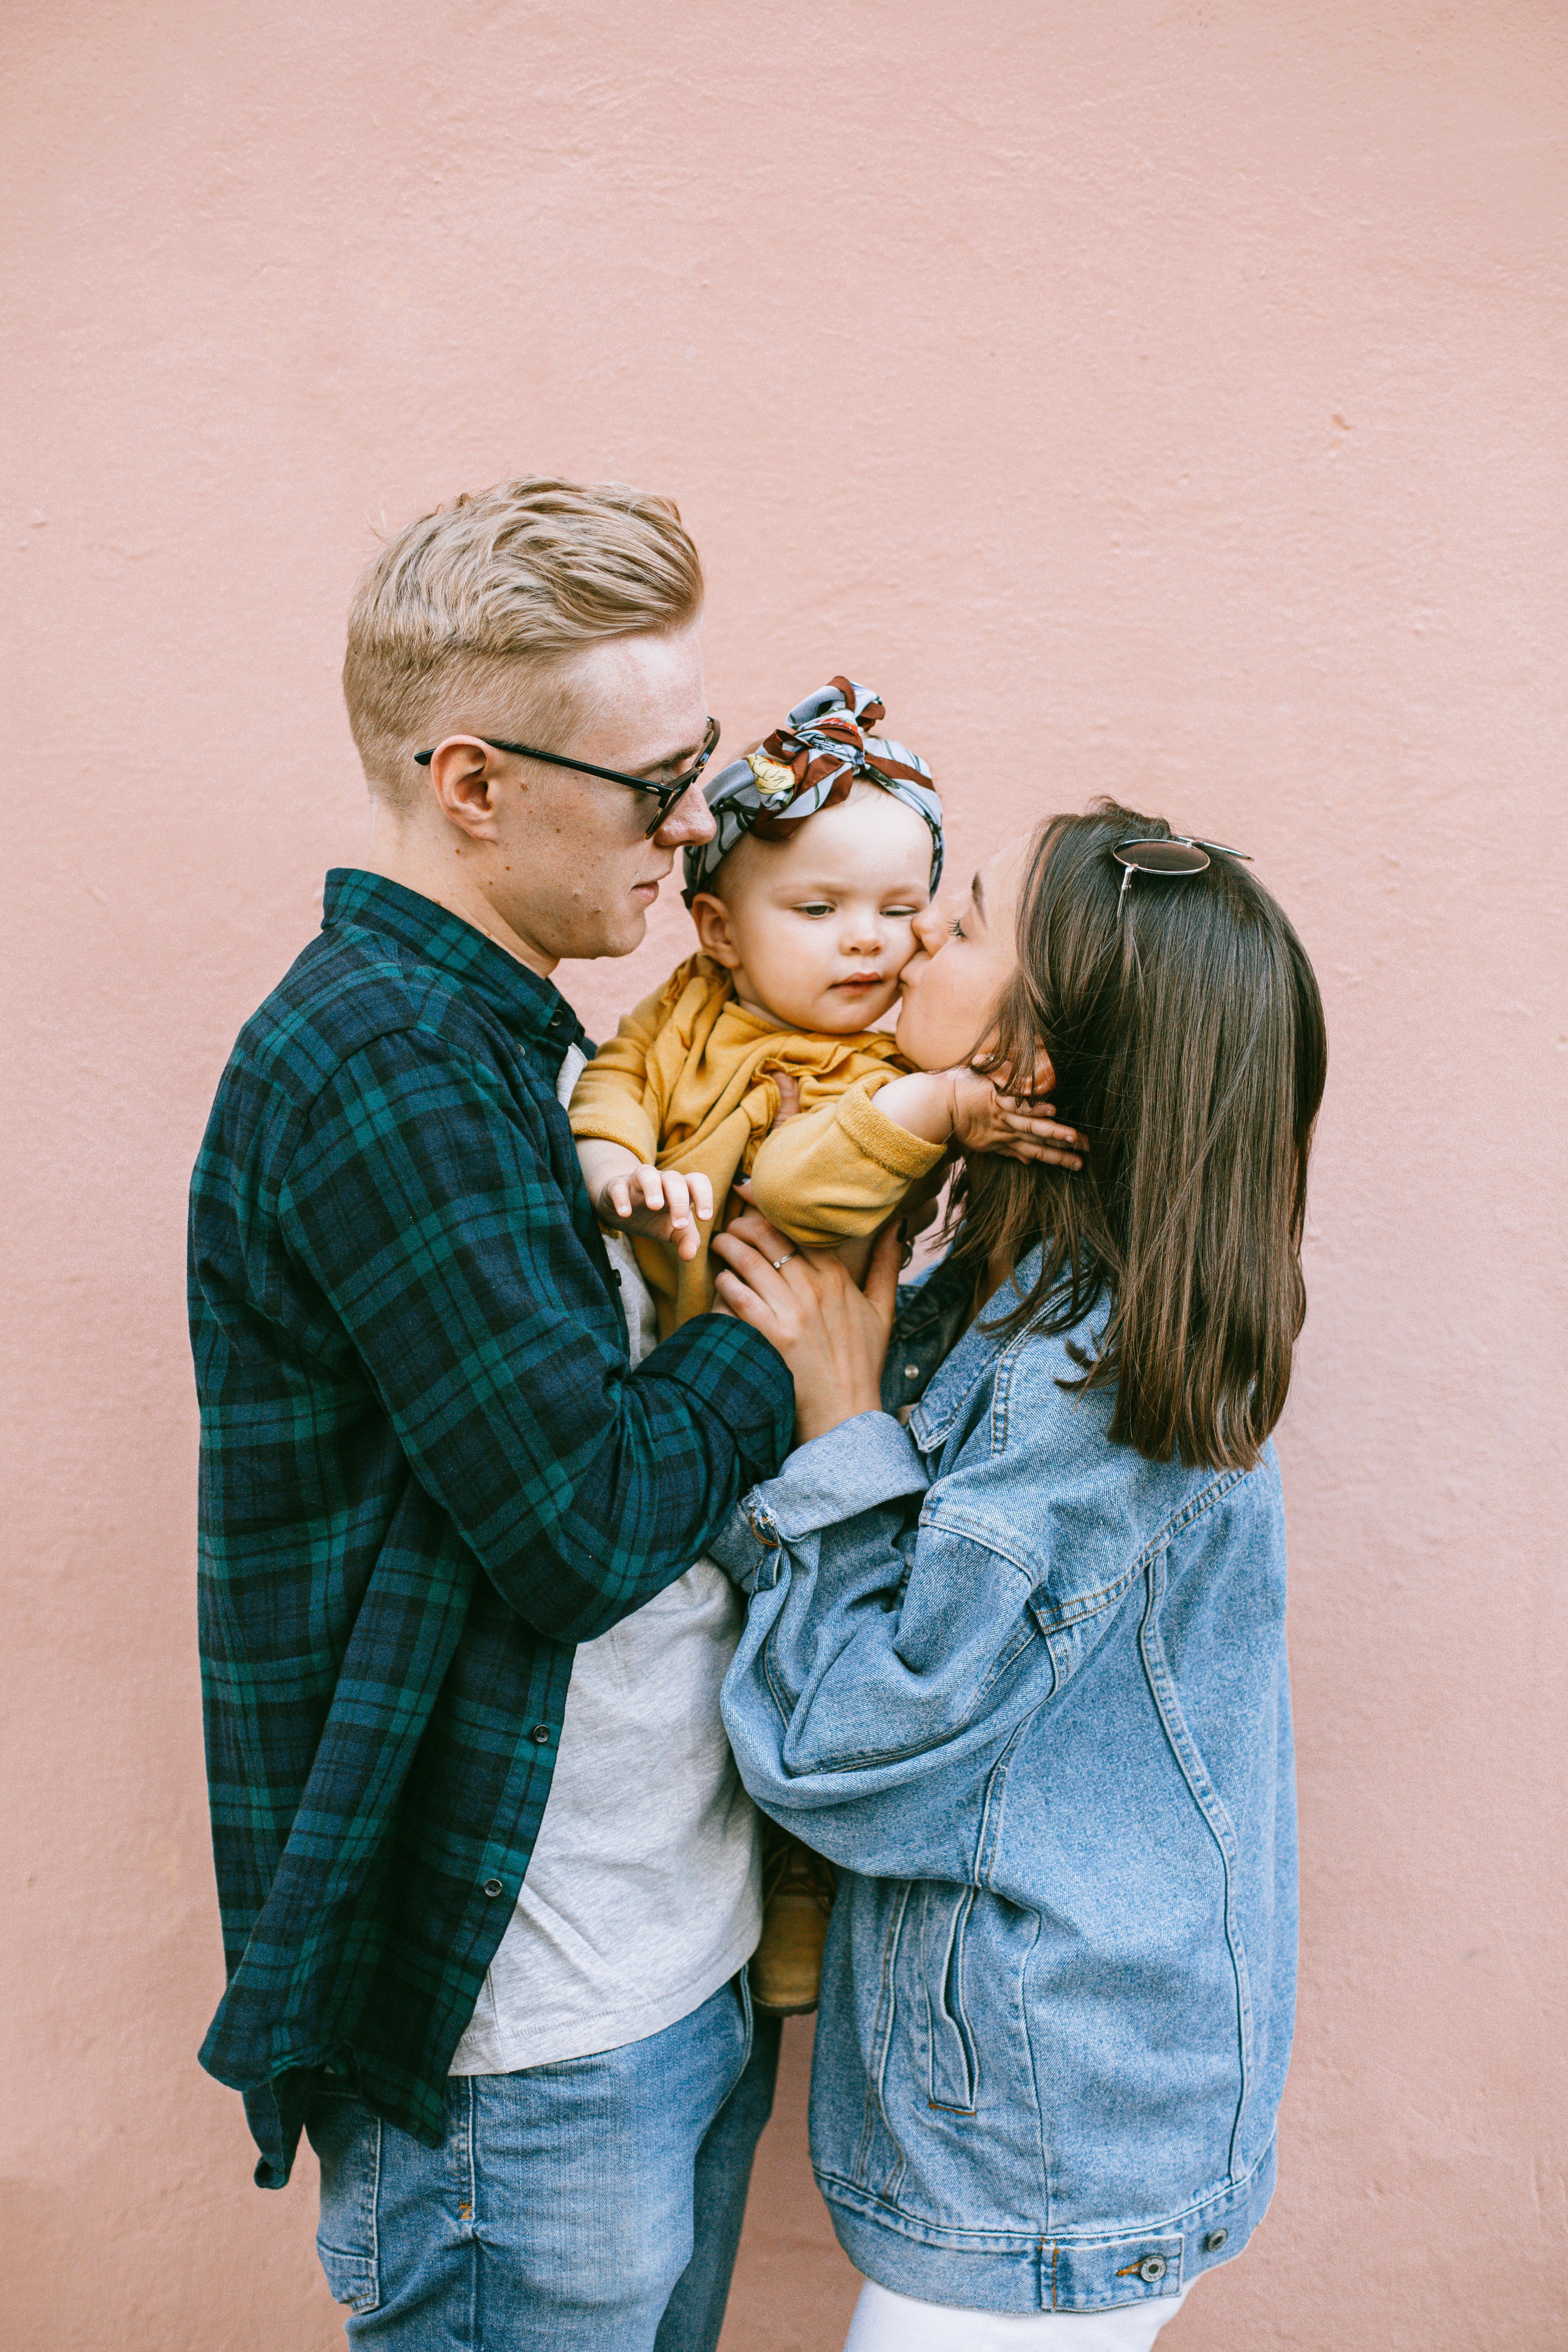 Fred and Madyson adopted Carly's daughter | Photo: Pexels